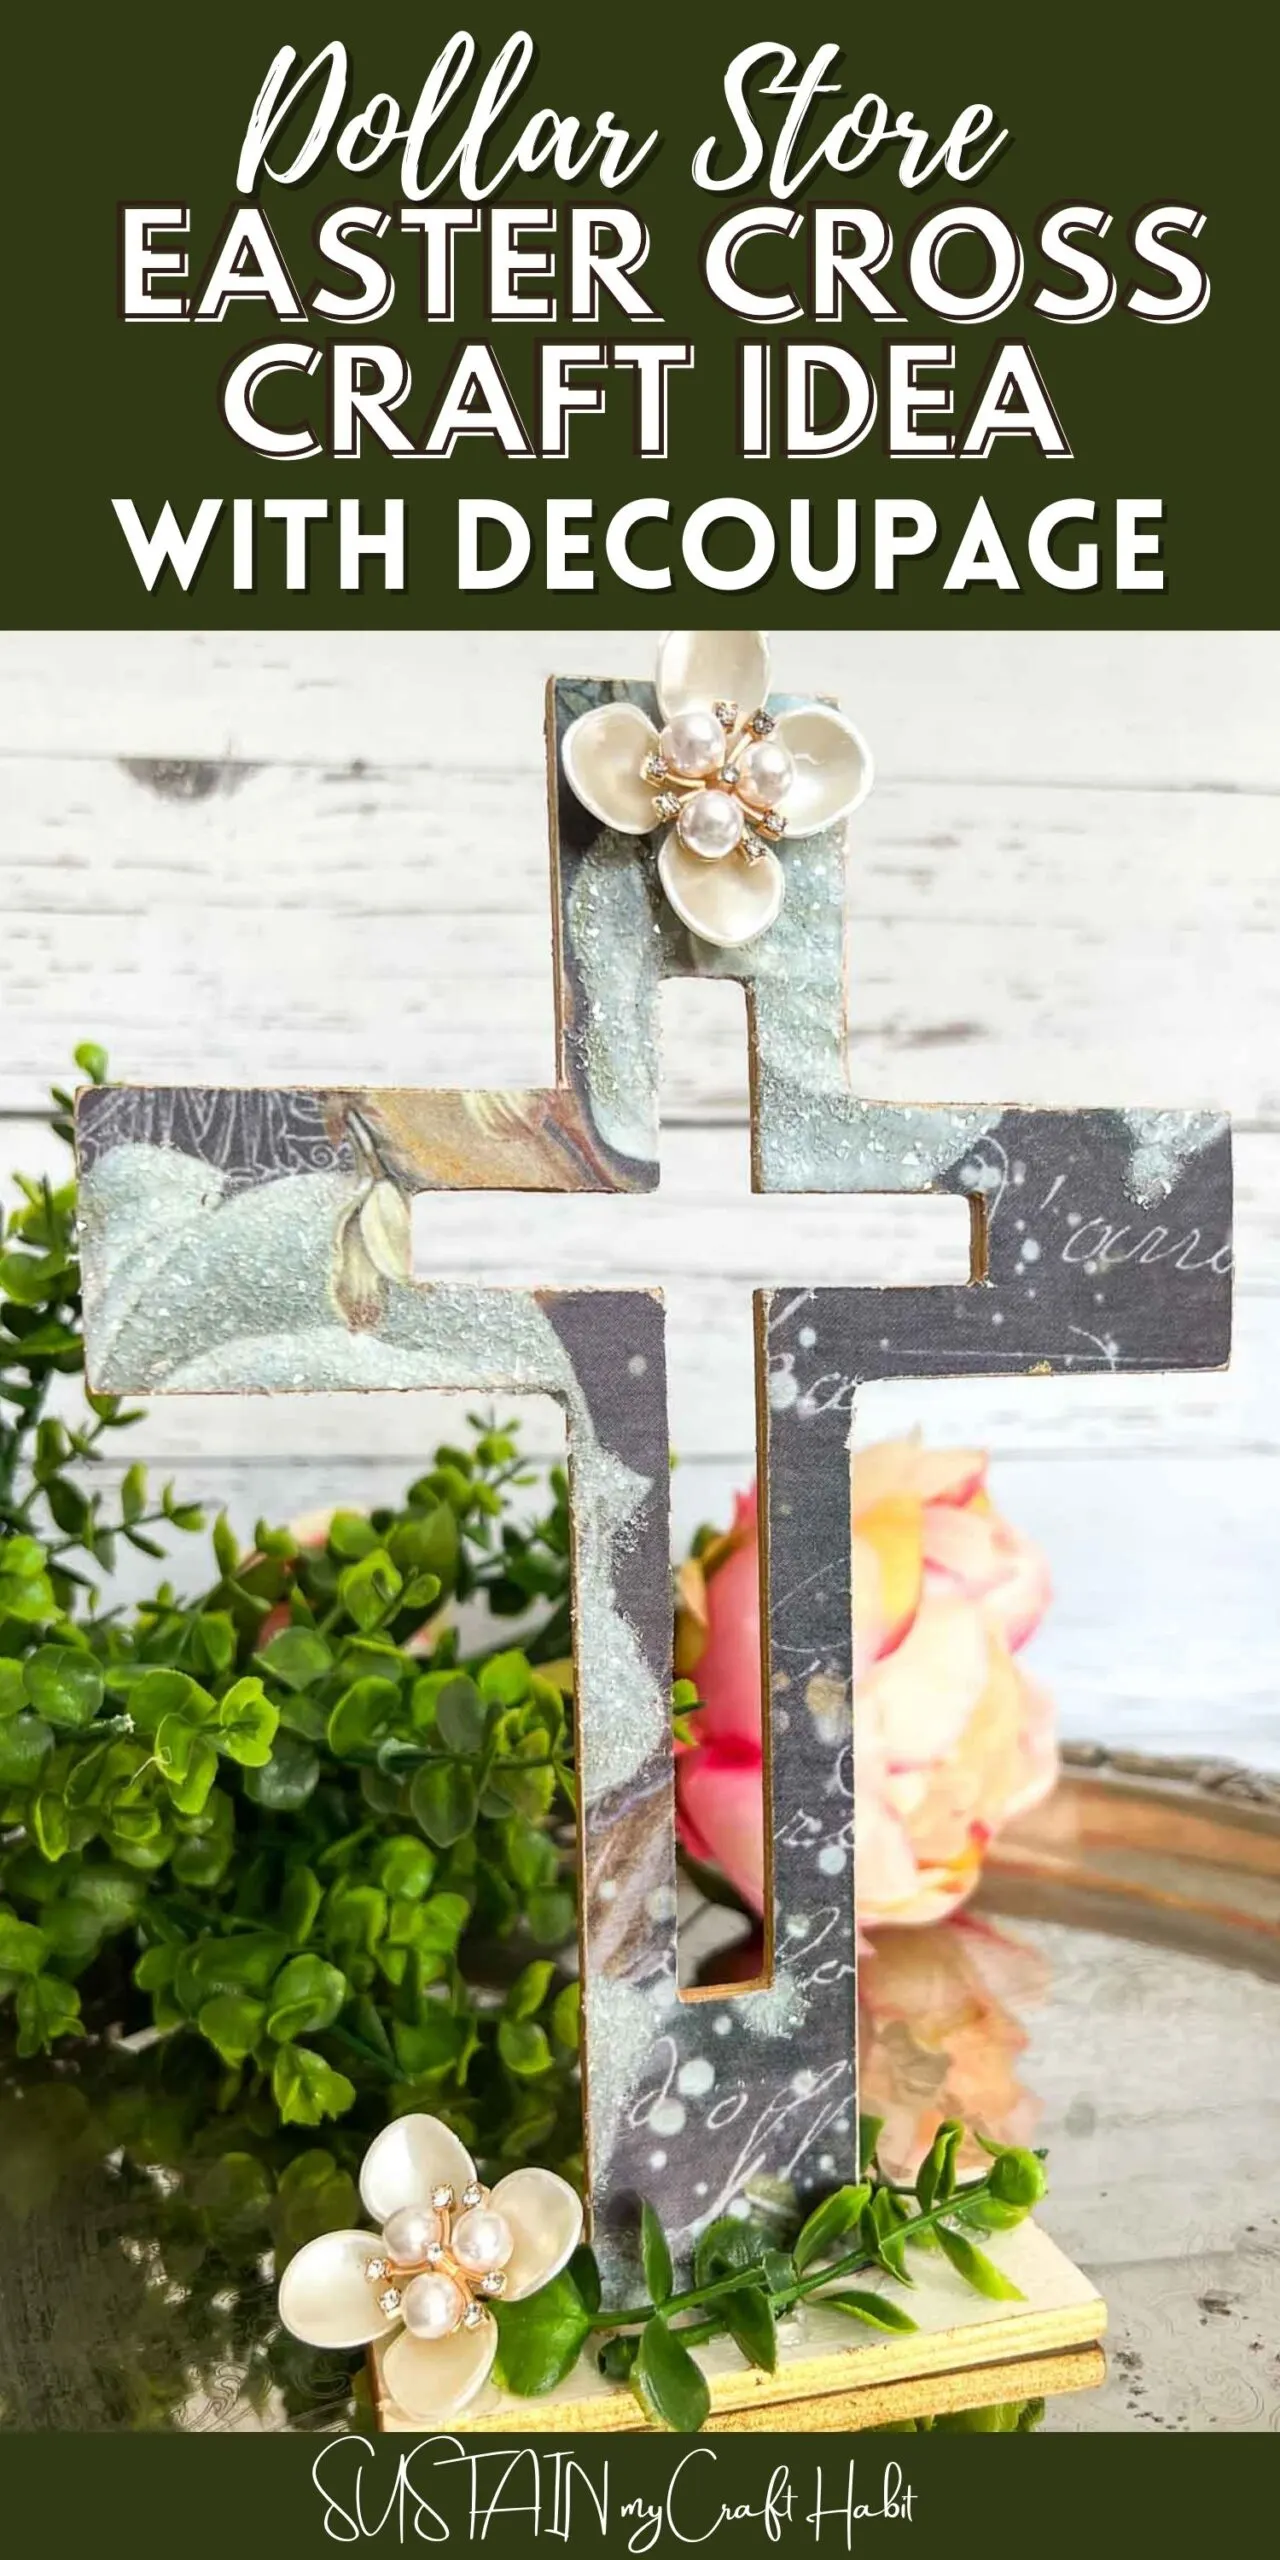 Dollar Tree wood cross decorated with decoupage paper and embellishments with text overlay.